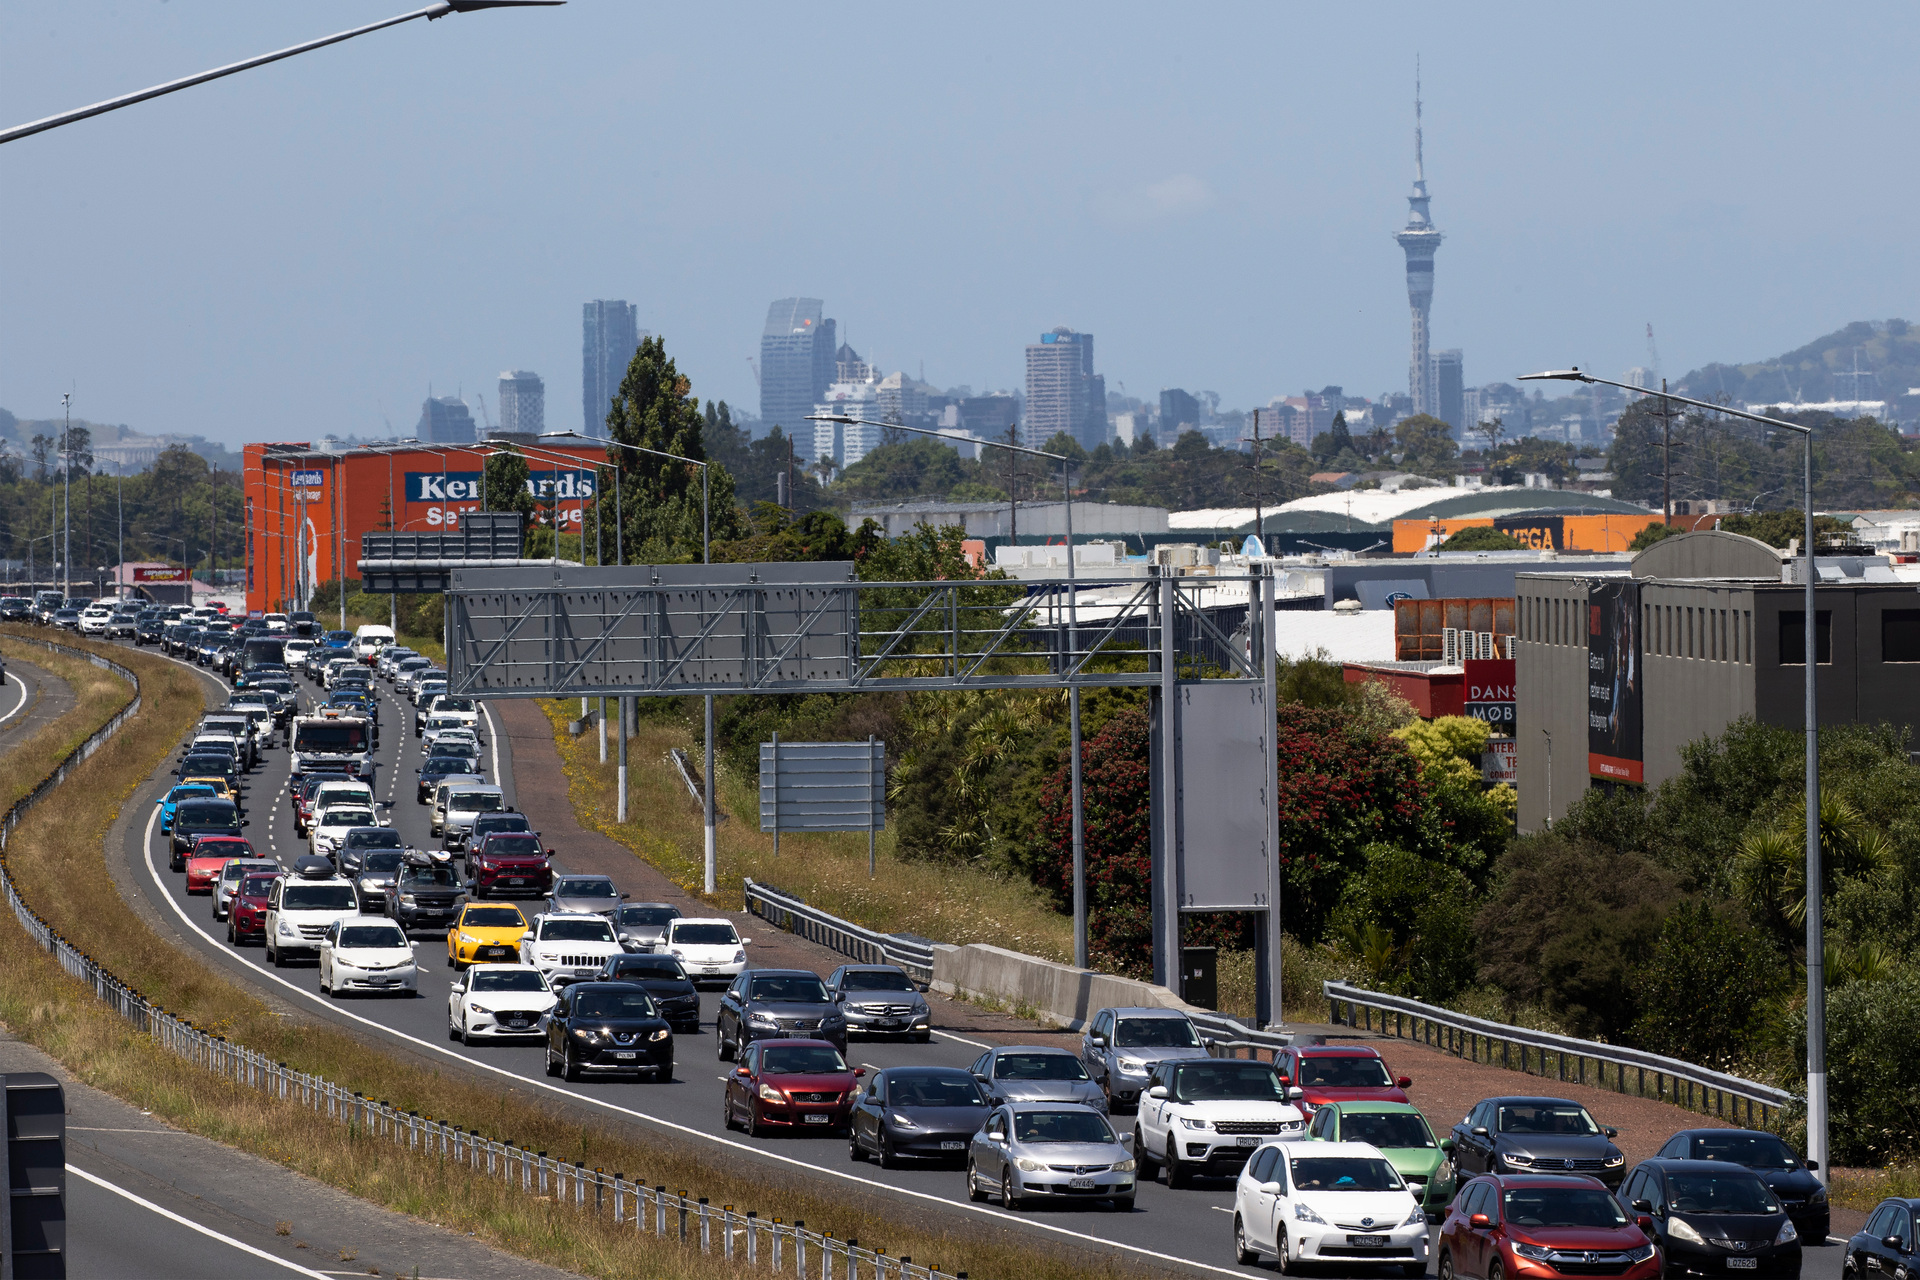 Christmas rush: Traffic to get busy on main highways across the country -  NZ Herald